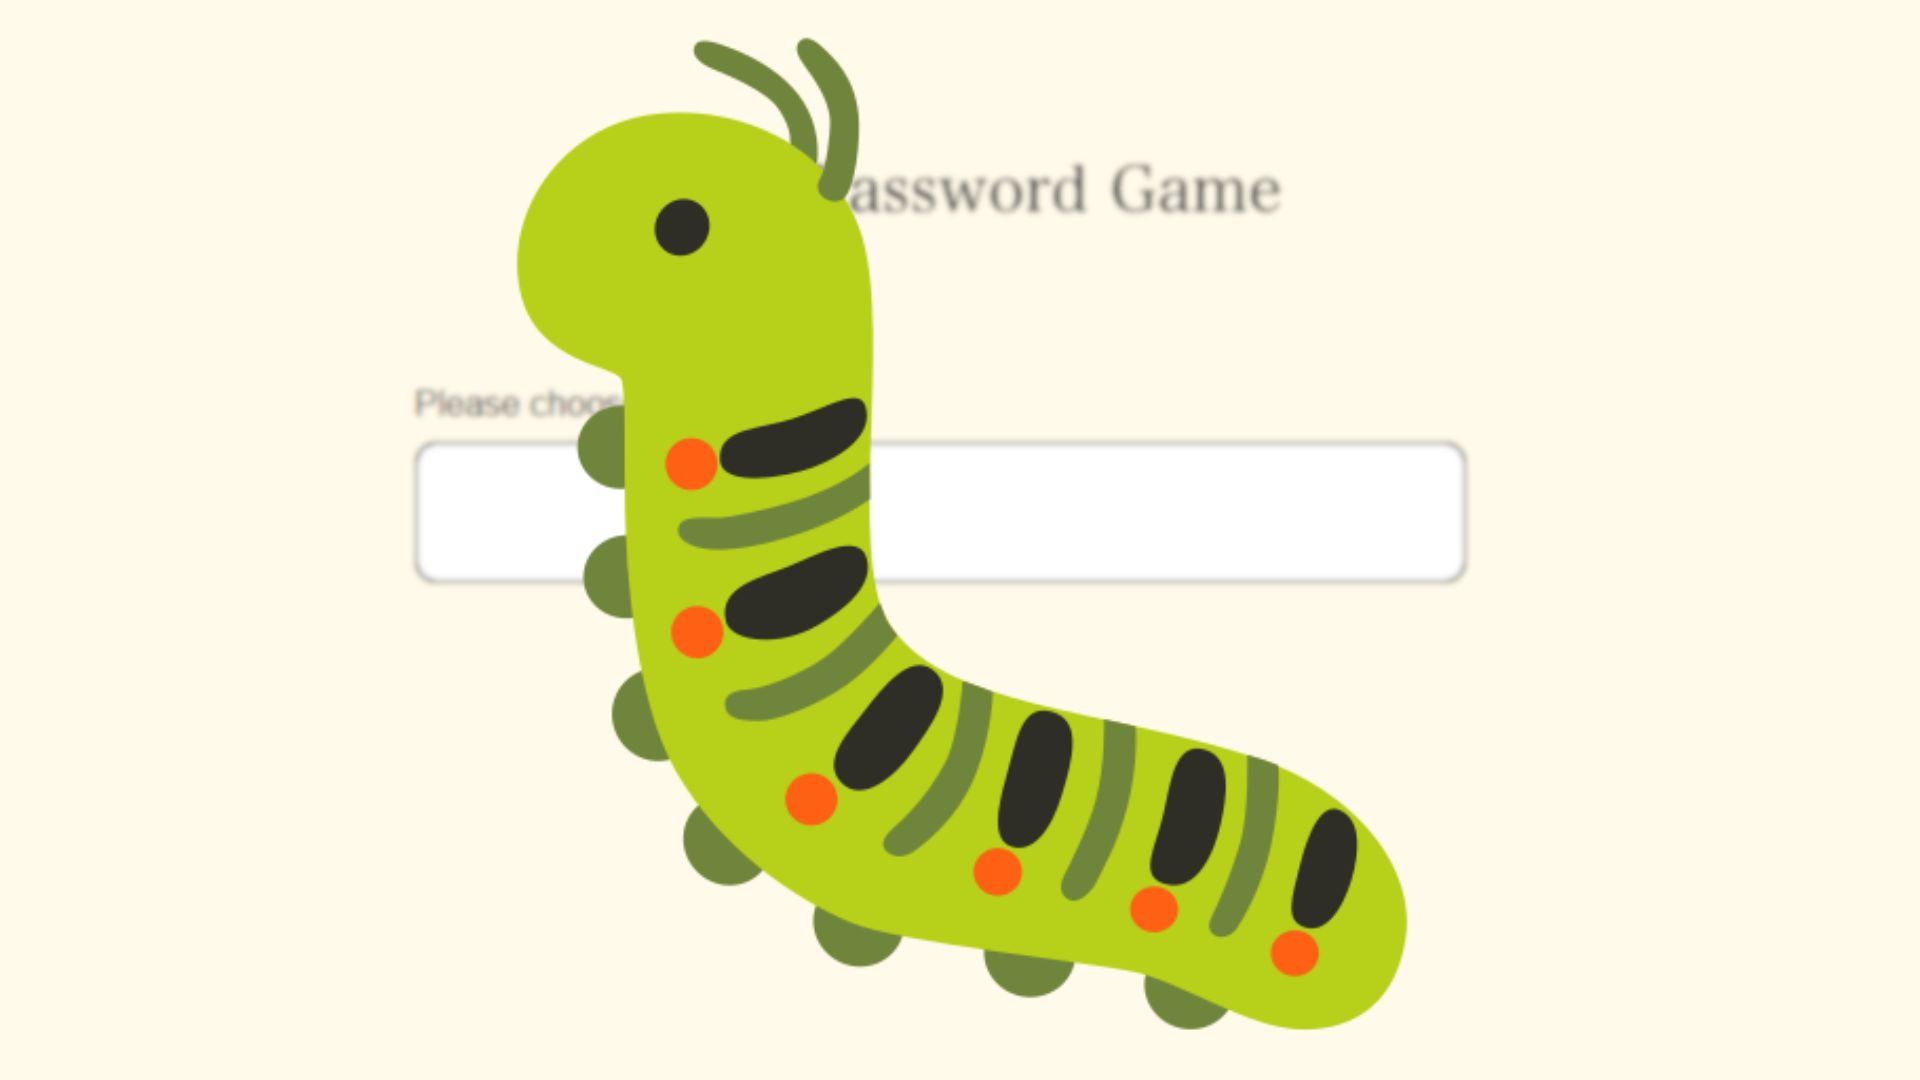 This fun free game is all about silly password rules